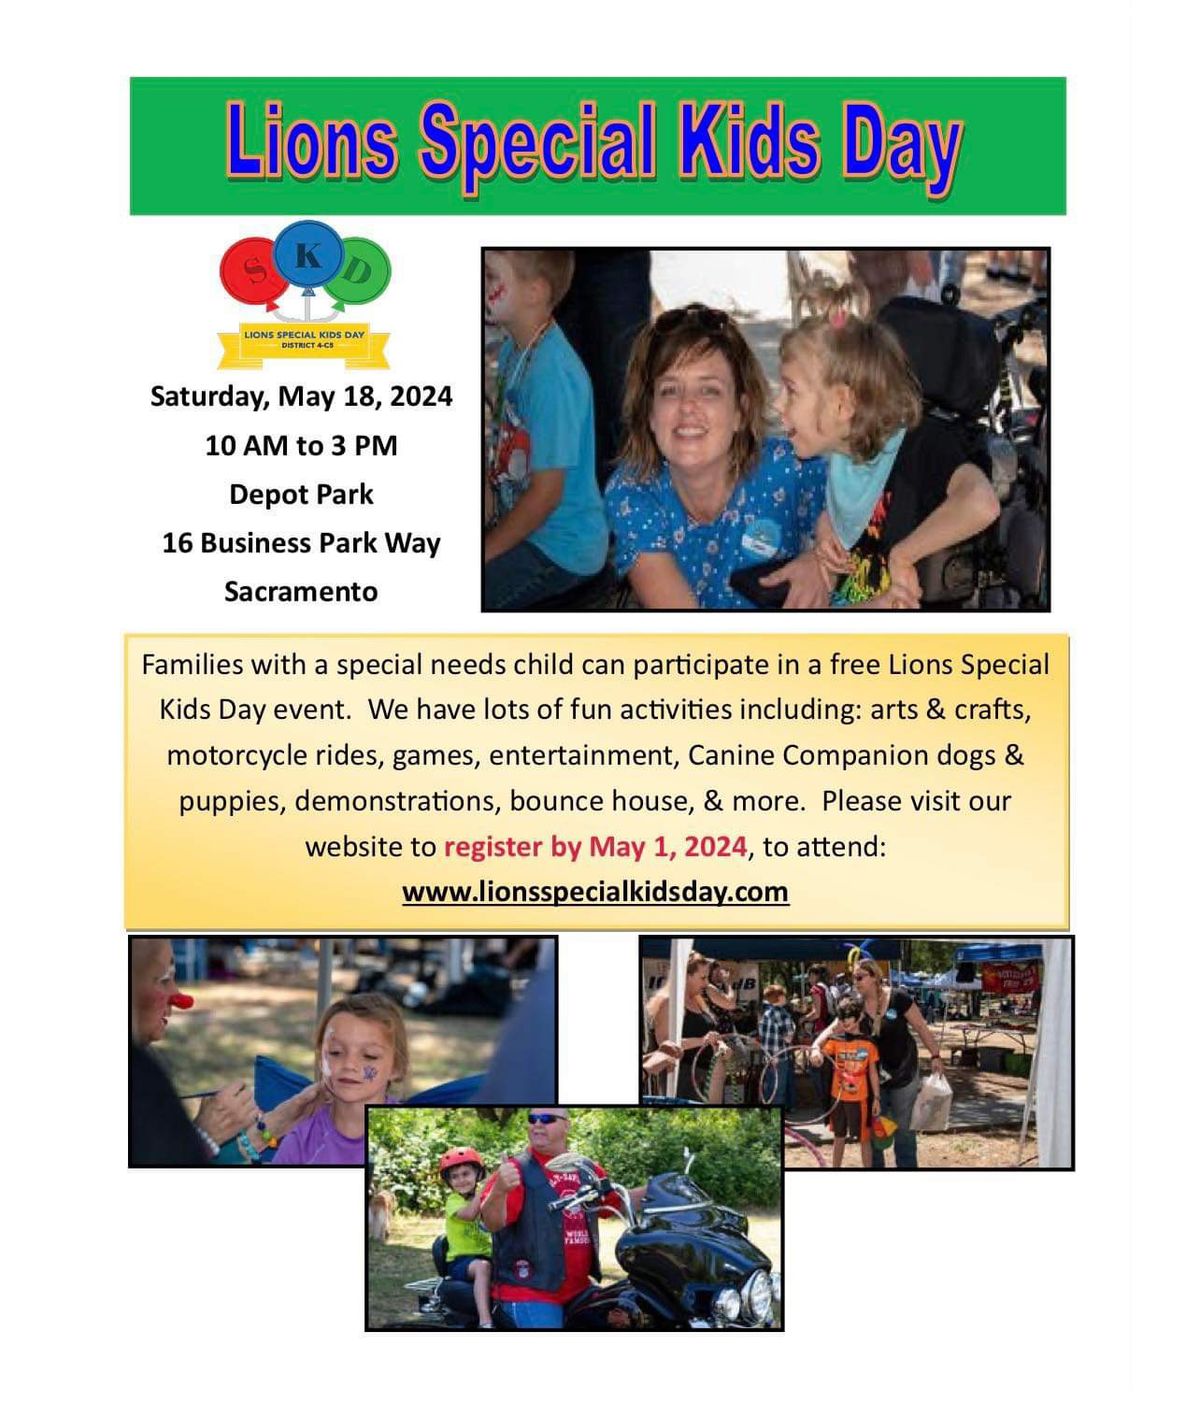 Lions Special Kids Day - \u201cA day of food, fun and friendship\u201d.